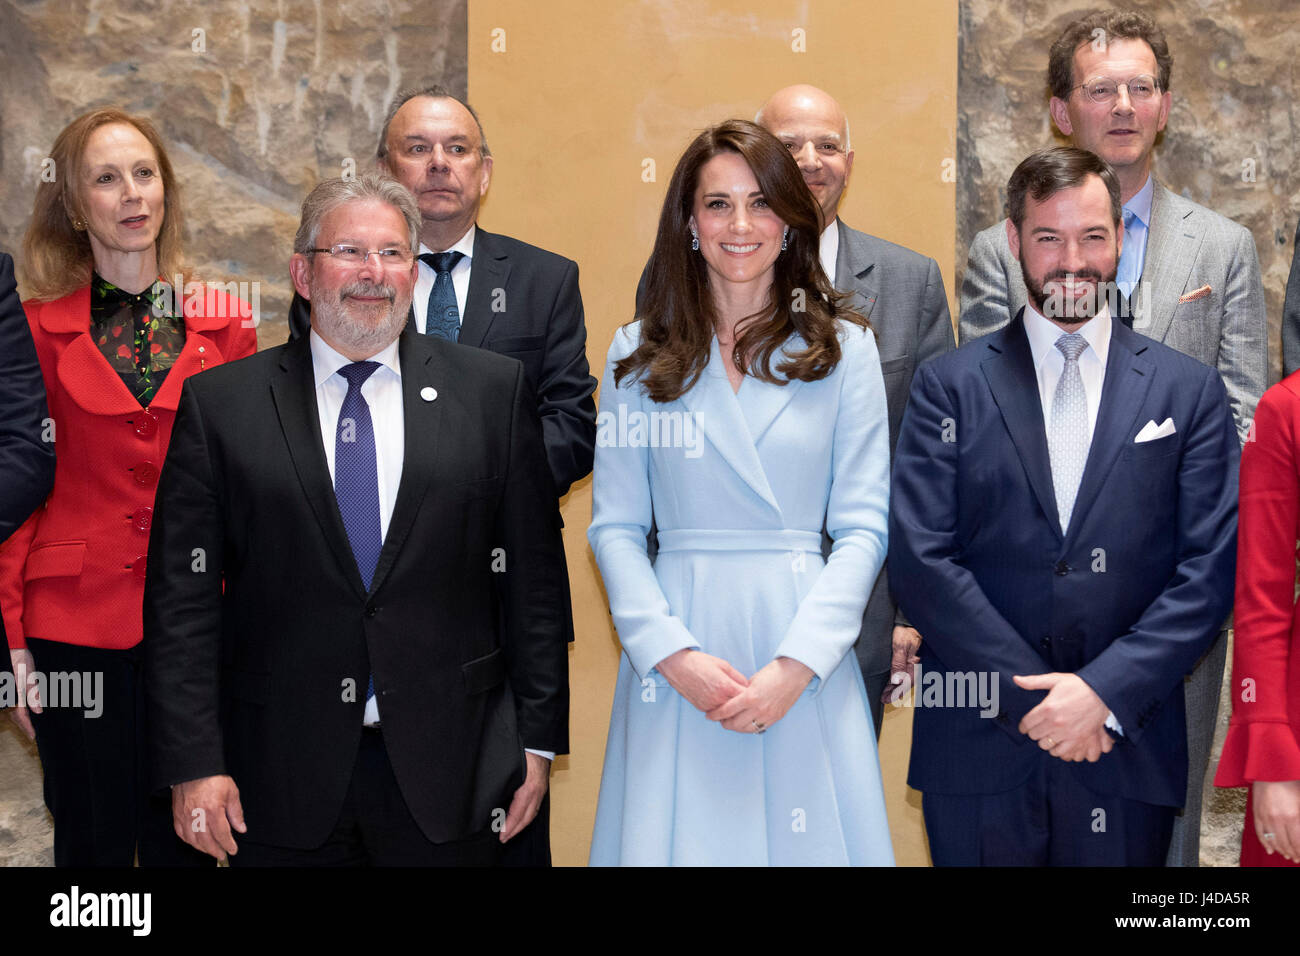 The Duchess of Cambridge with Crown Prince Guillaume during a visit to the Luxembourg City Museum, where she viewed an exhibition about the city state's history and walked along the Cornicjhe, during a day of visits in Luxembourg where she is attending commemorations marking the 150th anniversary 1867 Treaty of London, that confirmed the country's independence and neutrality. Stock Photo